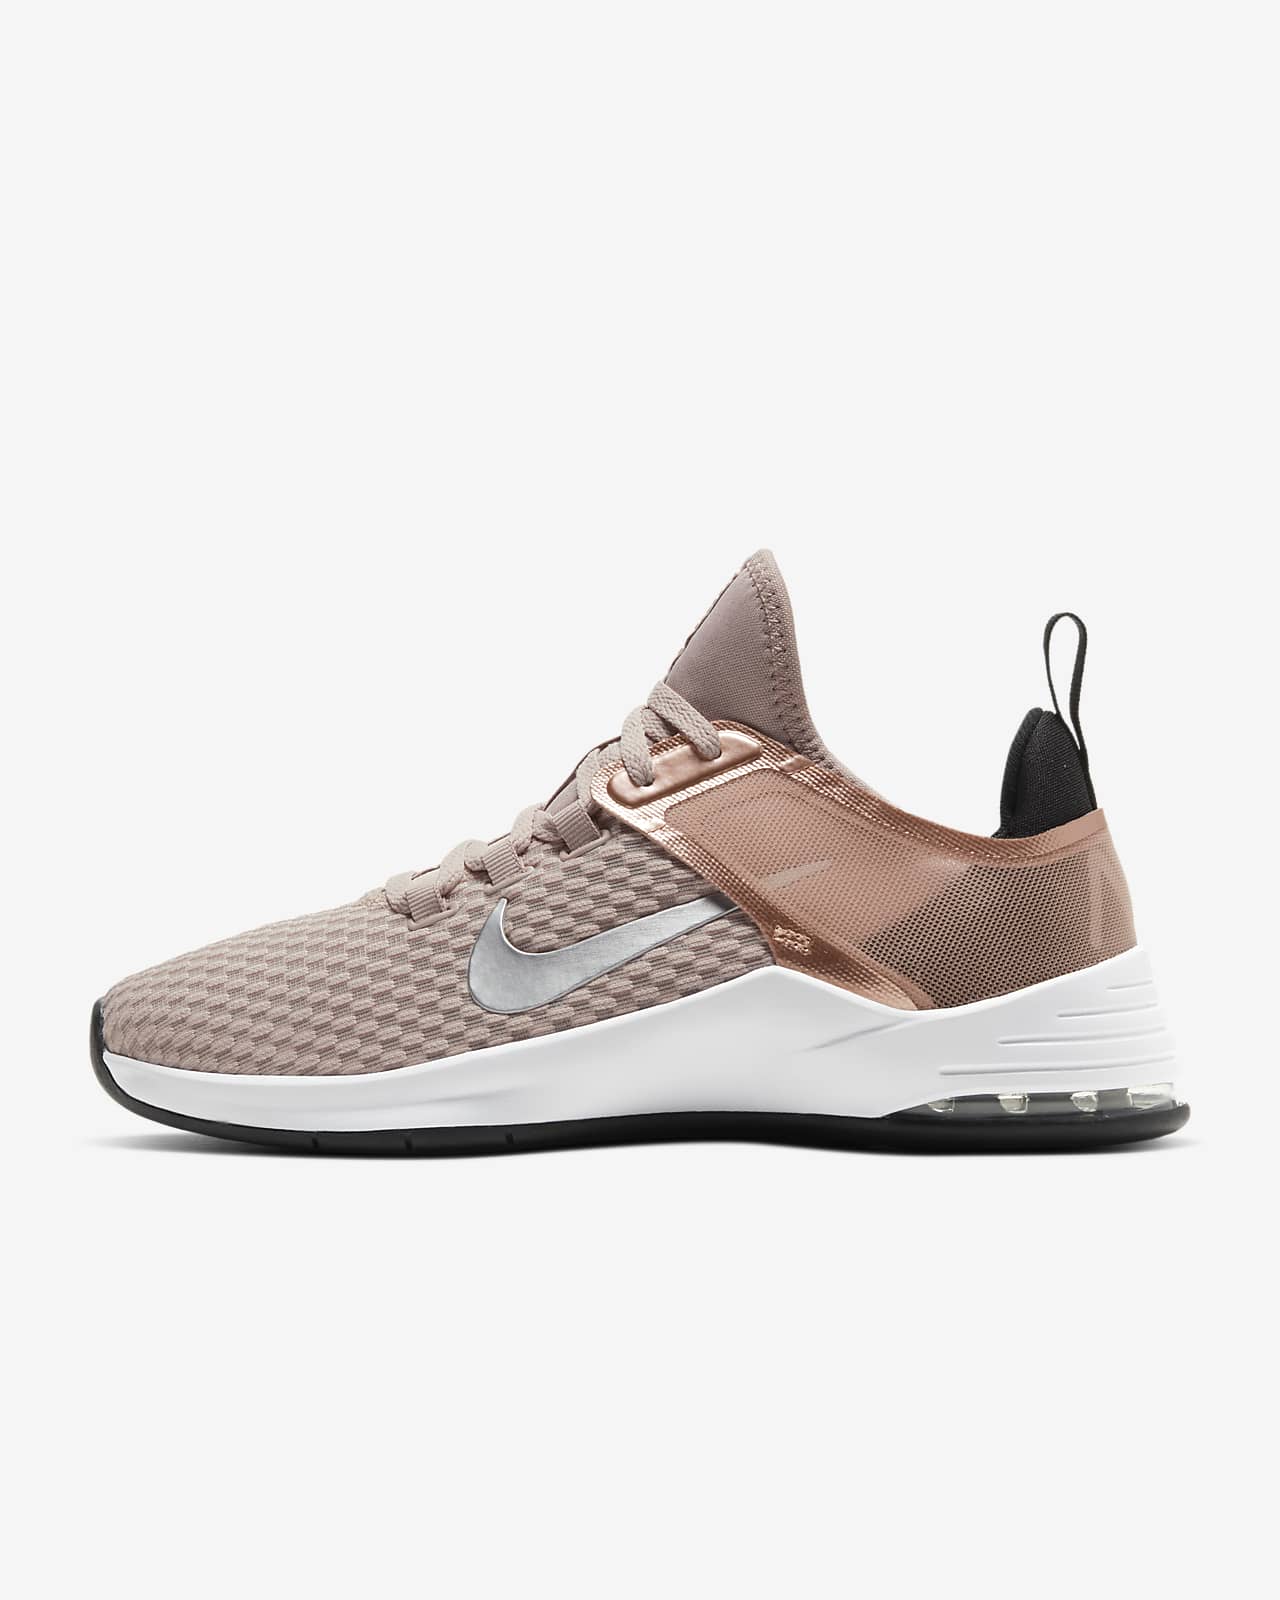 threshold learn it's useless Nike Air Max Bella Tr 2 Stone Mauve Greece, SAVE 60% - aveclumiere.com